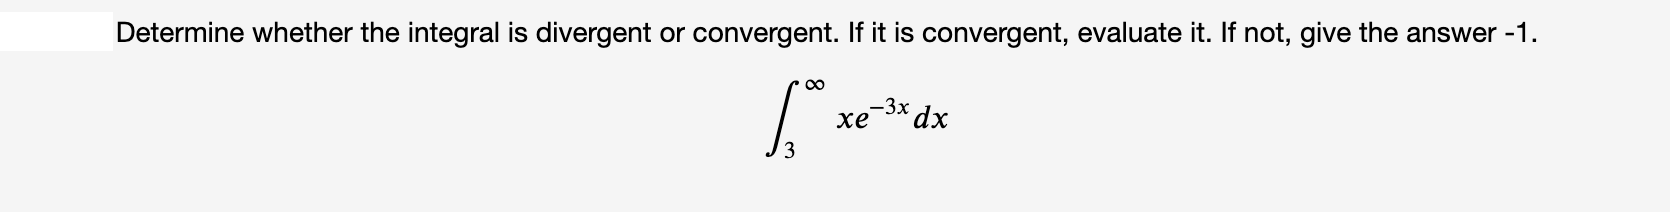 Determine whether the integral is divergent or convergent. If it is convergent, evaluate it. If not, give the answer -1.
00
-3x dx
хе
3
